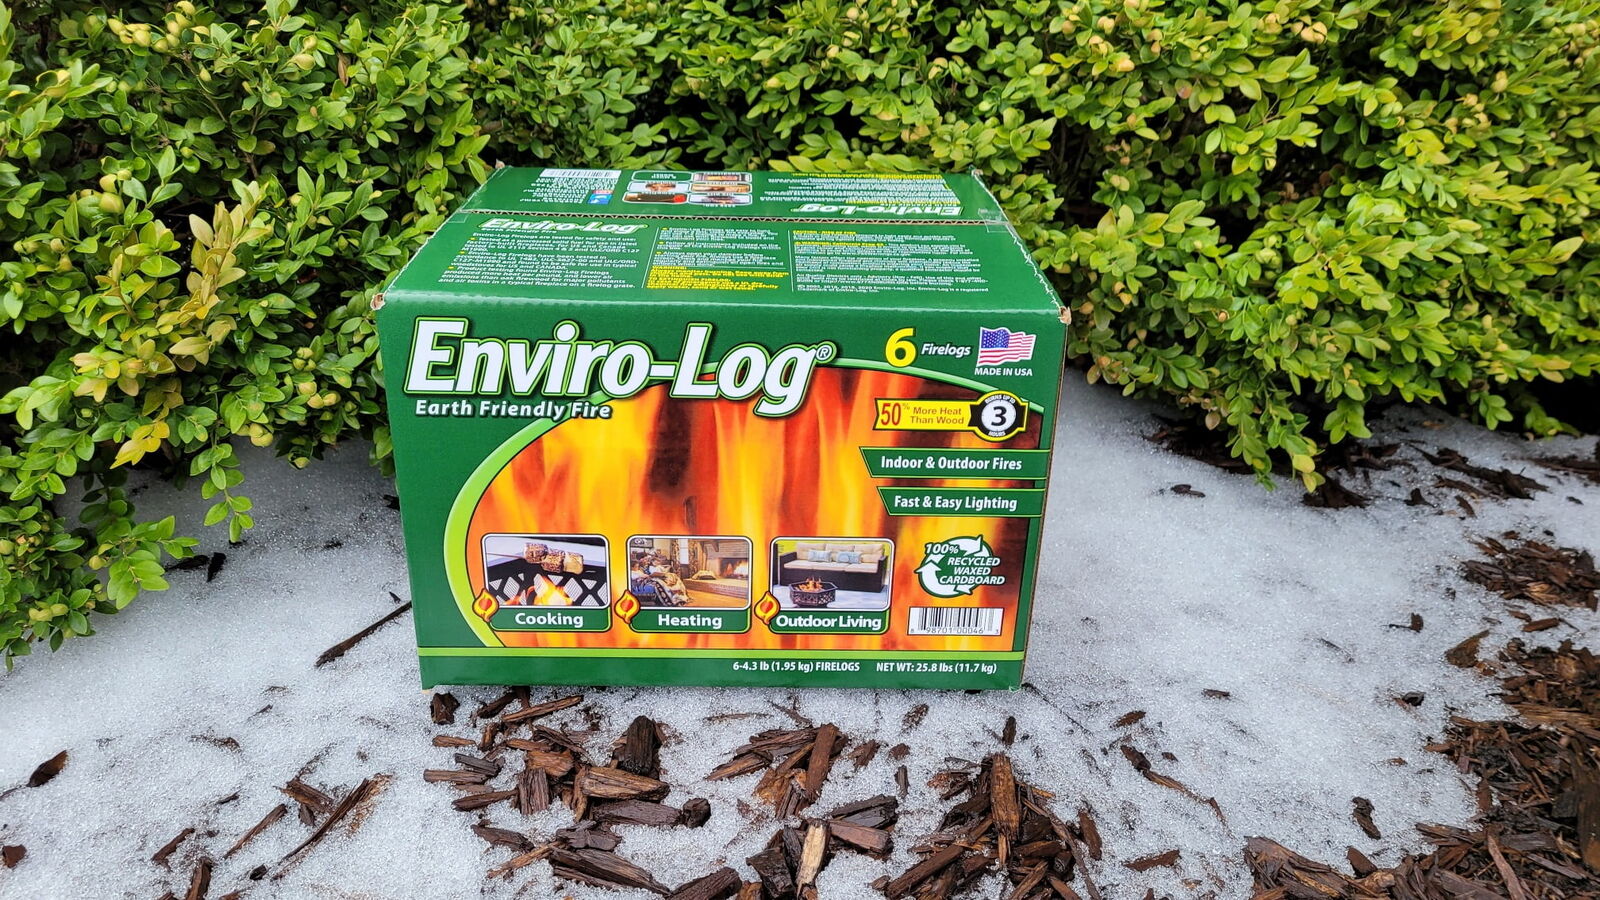 Indoor and Outdoor Fire Wood, 4.3 lb Firelogs, 25.8 lbs, 6 Count by Enviro-Log